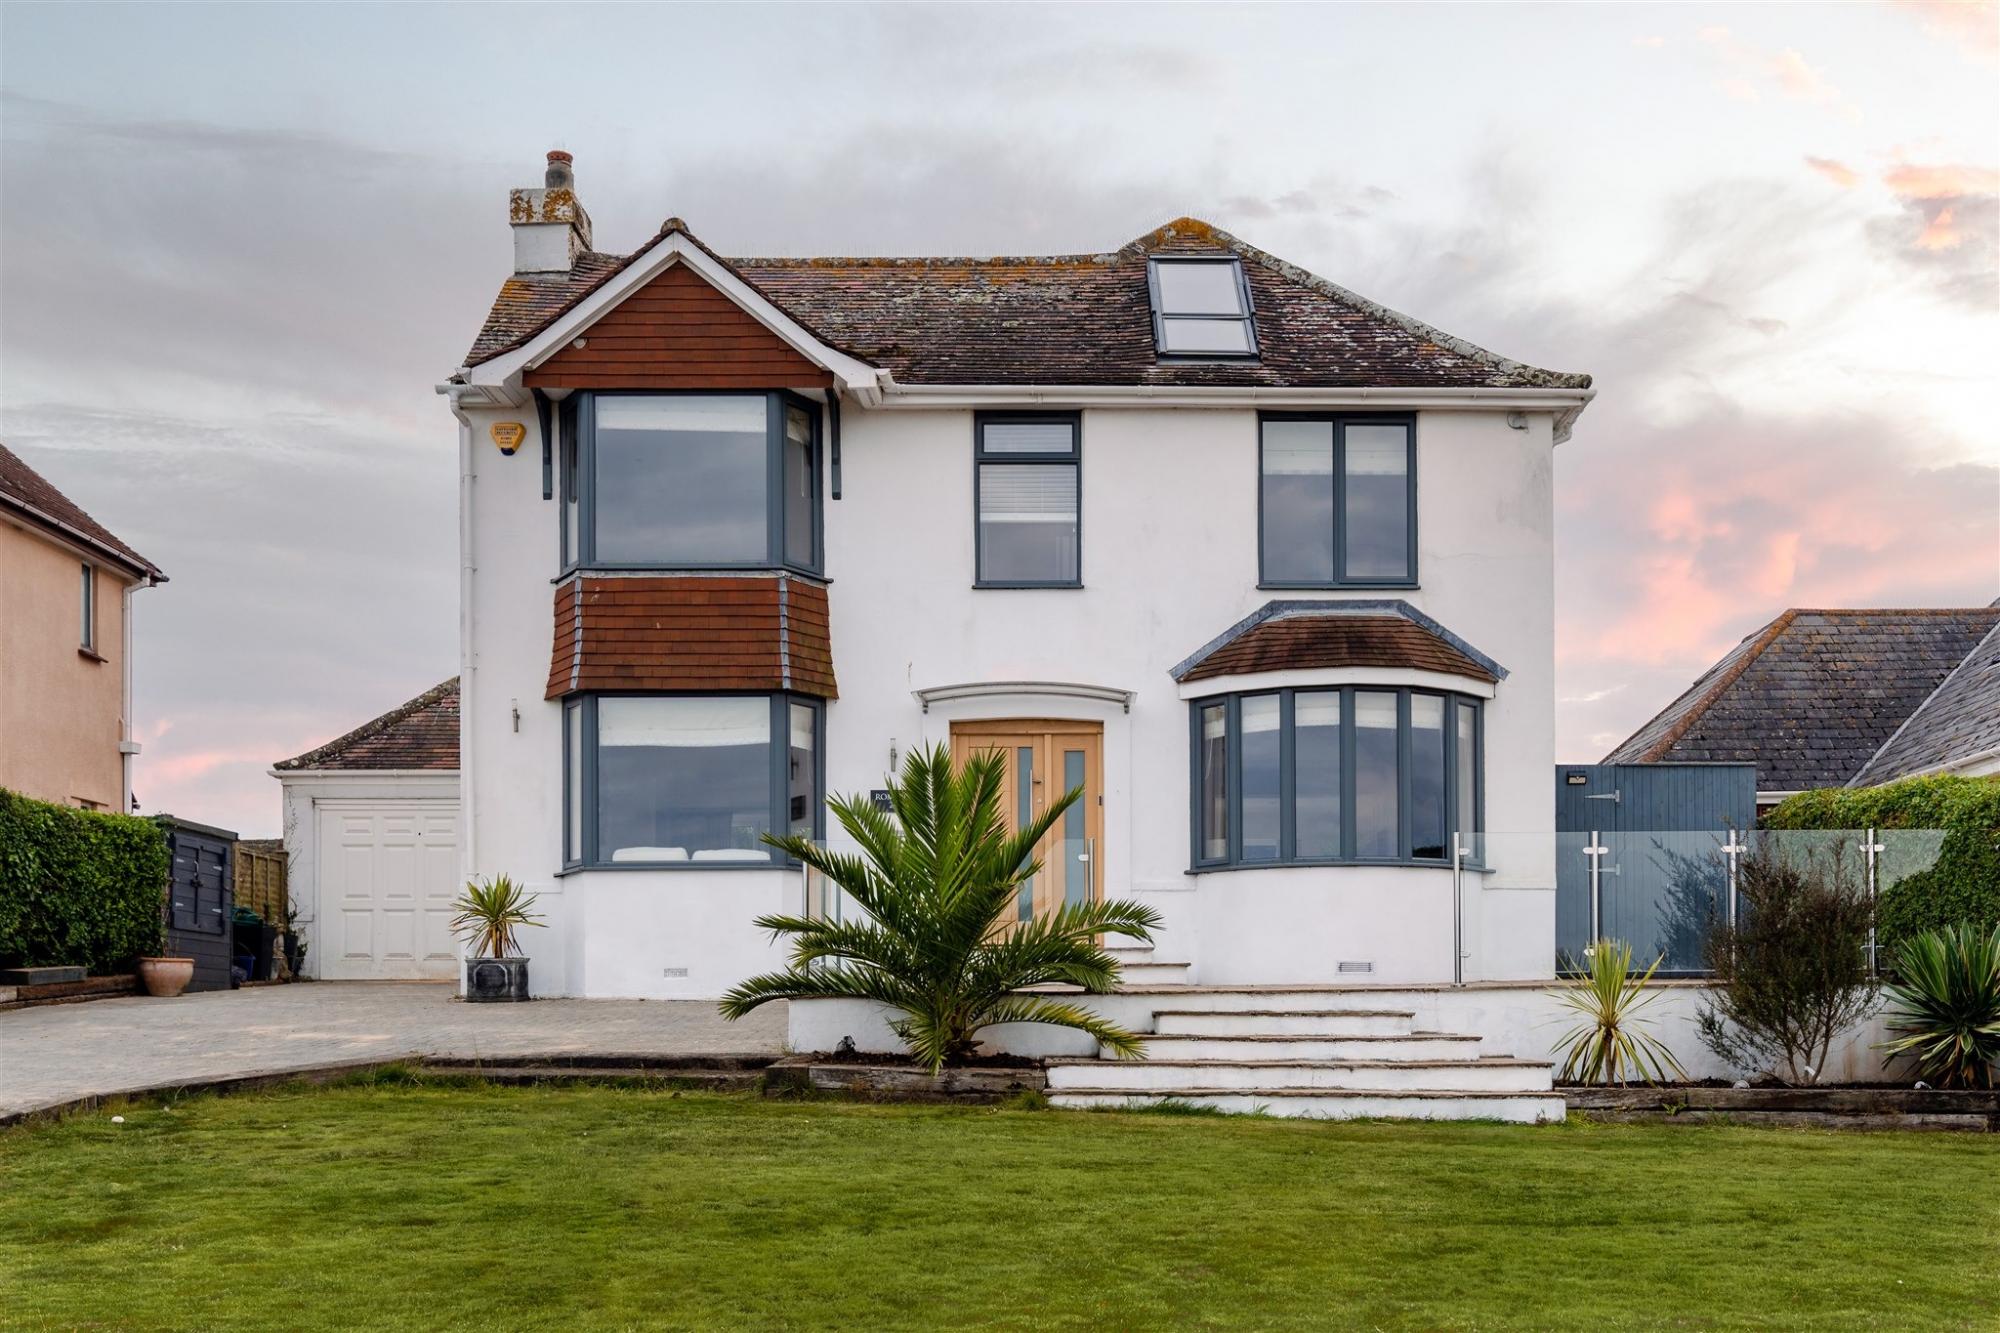 Property Image 1 - Romany - Family home next to Broadsand Beach with panoramic sea views